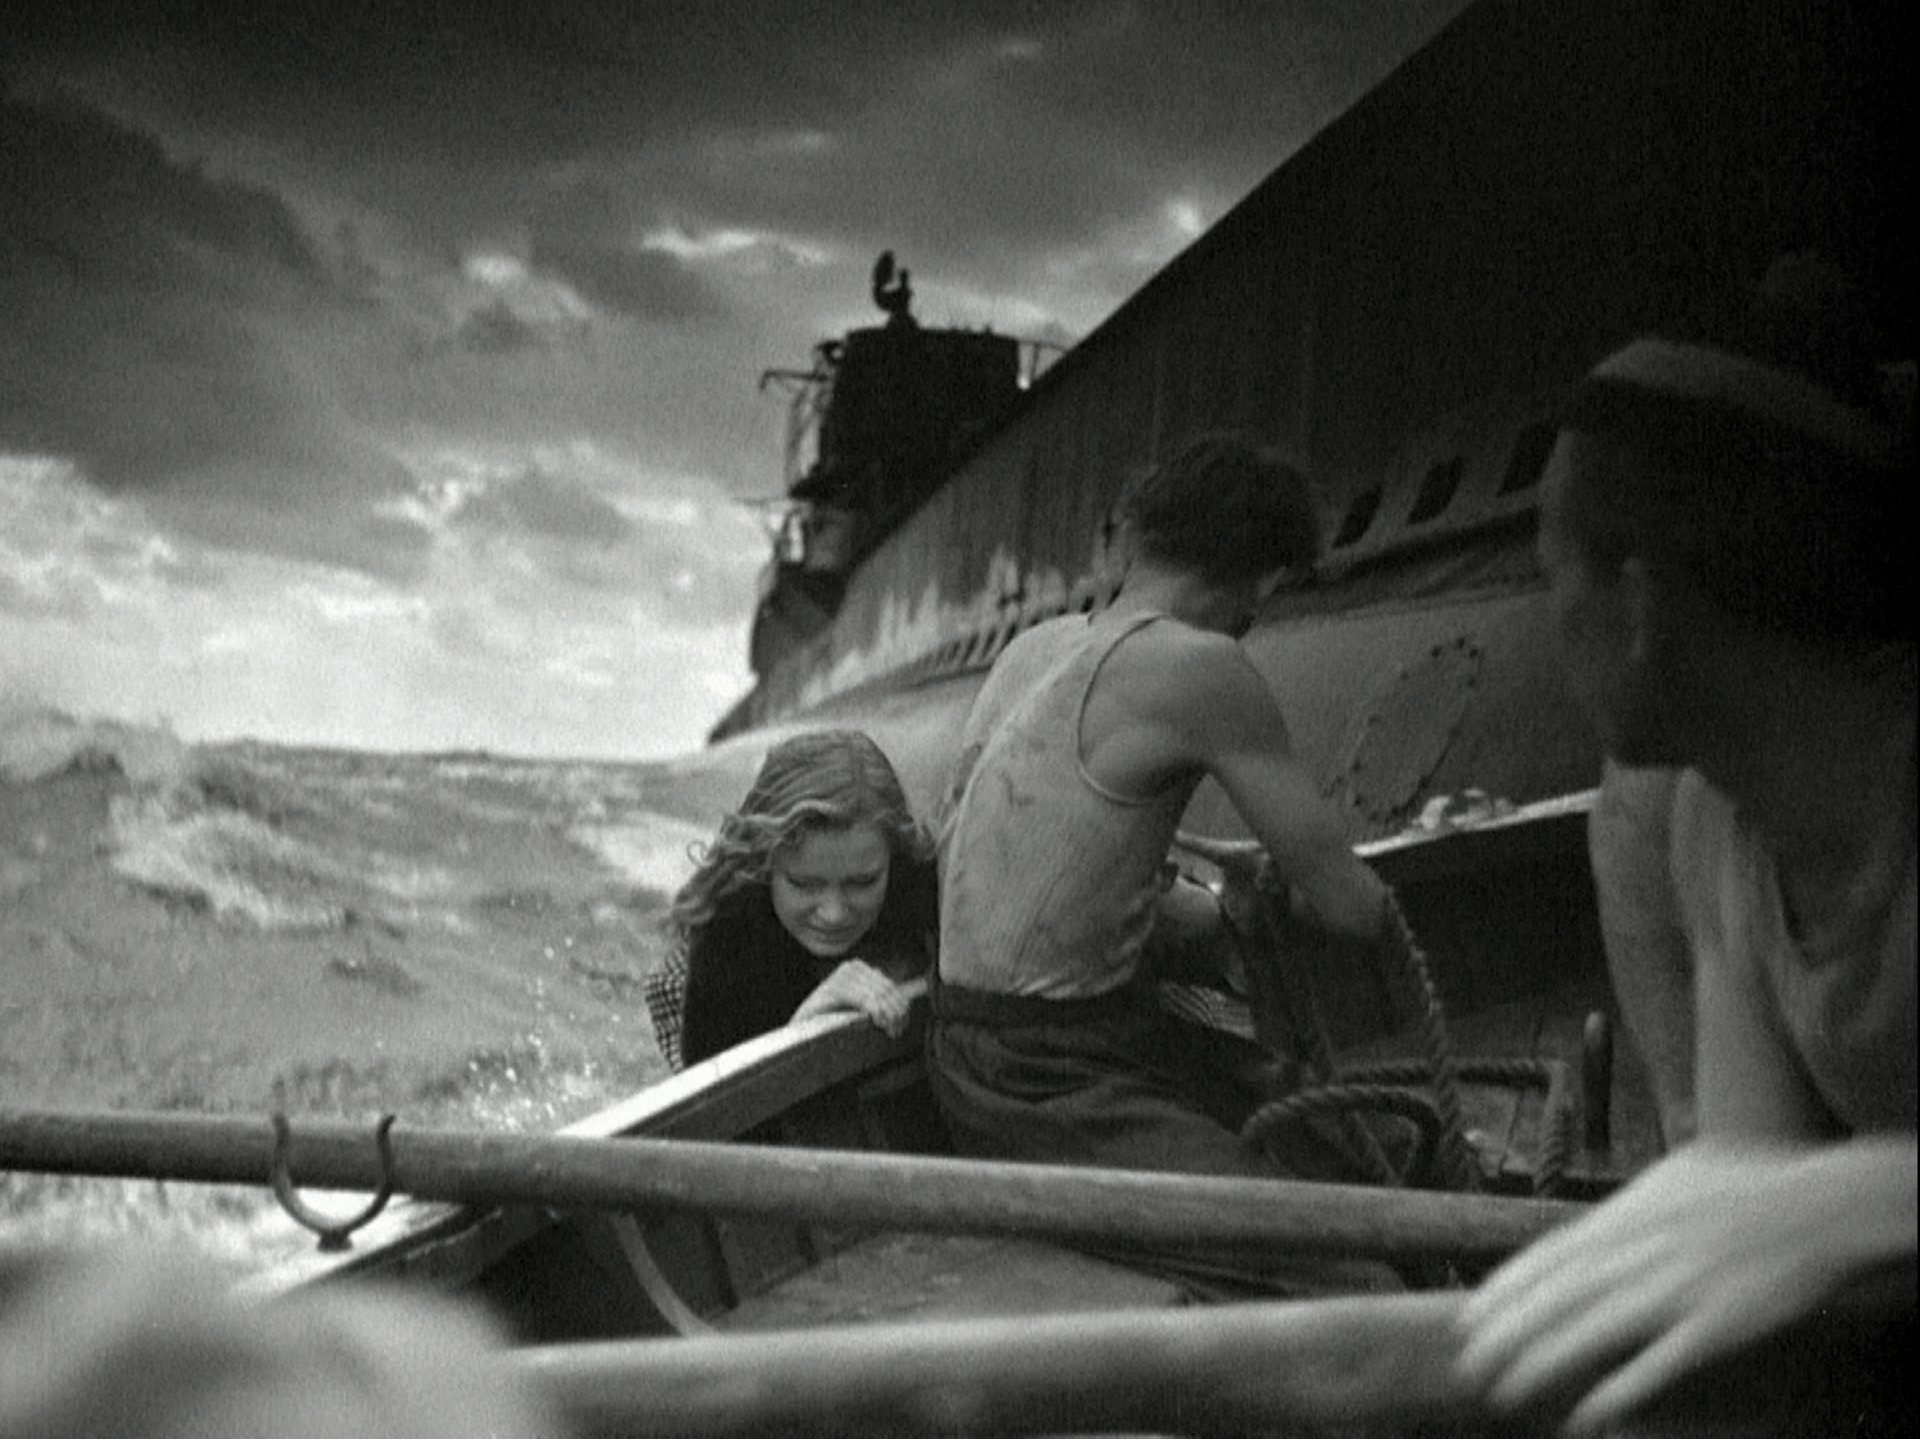 Two sailors in rough waters in a rowing boat to which a young woman is clinging, with a submarine in the background.